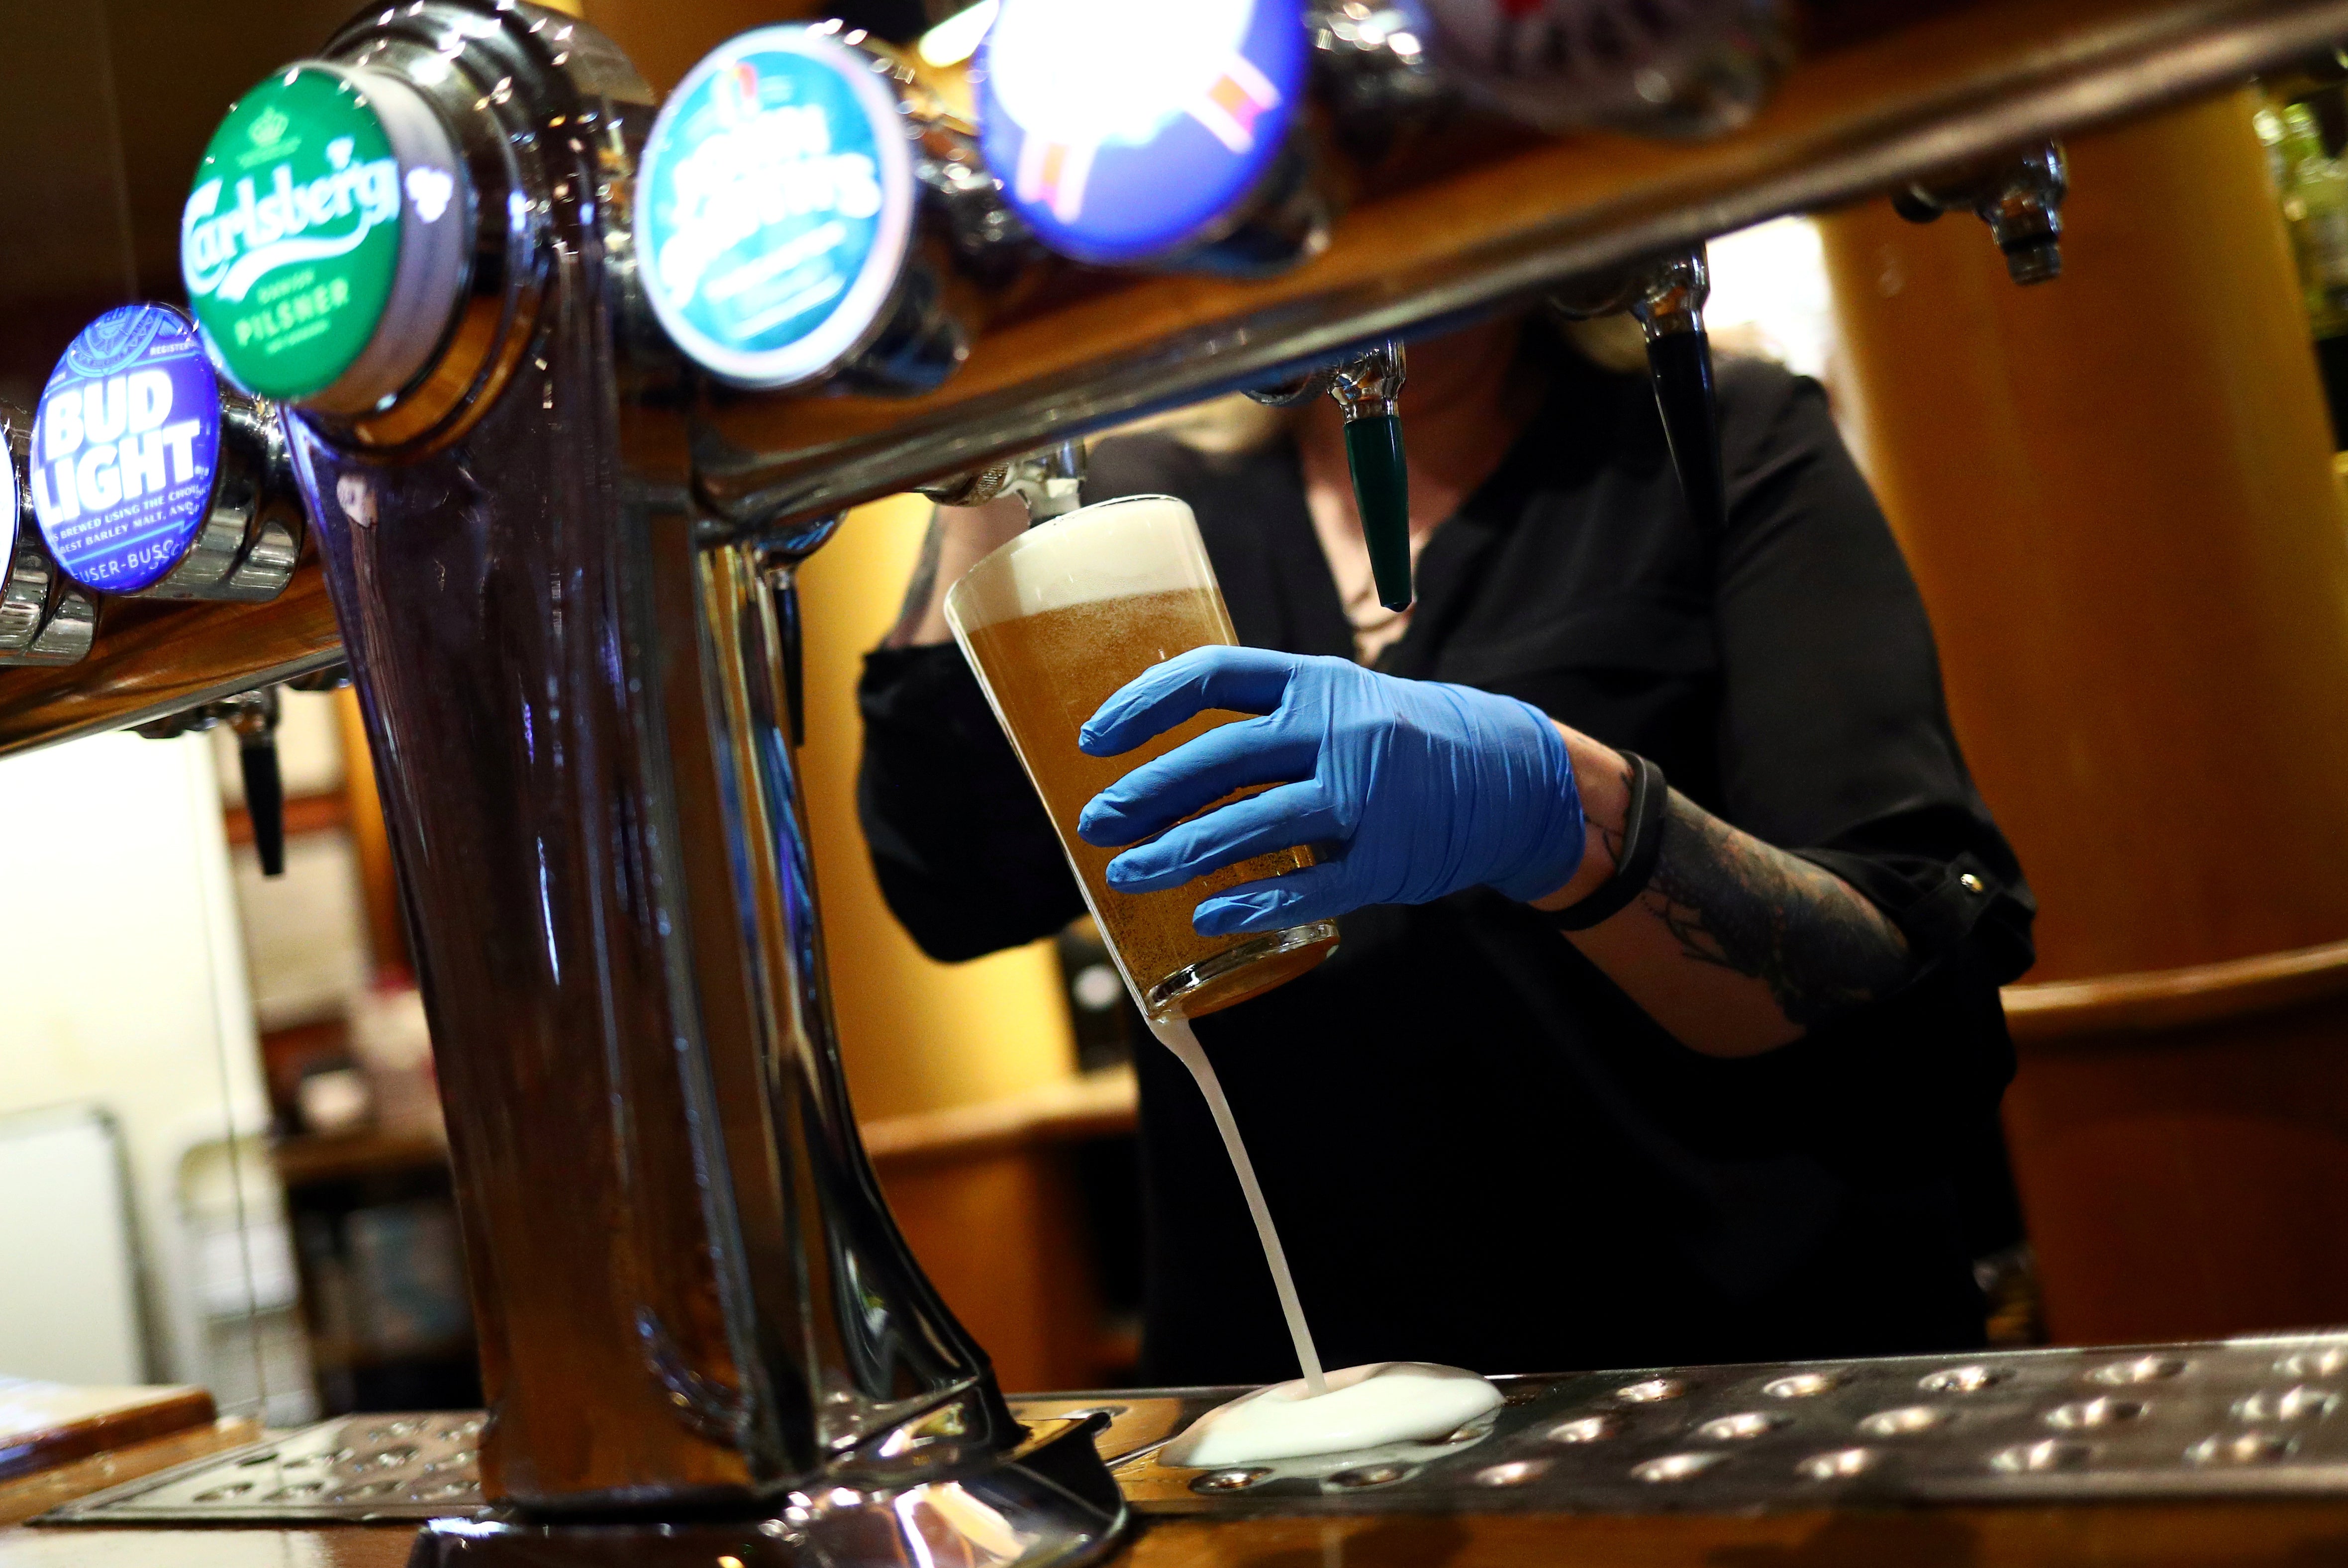 A worker serves a beer at The Holland Tringham Wetherspoons pub in London